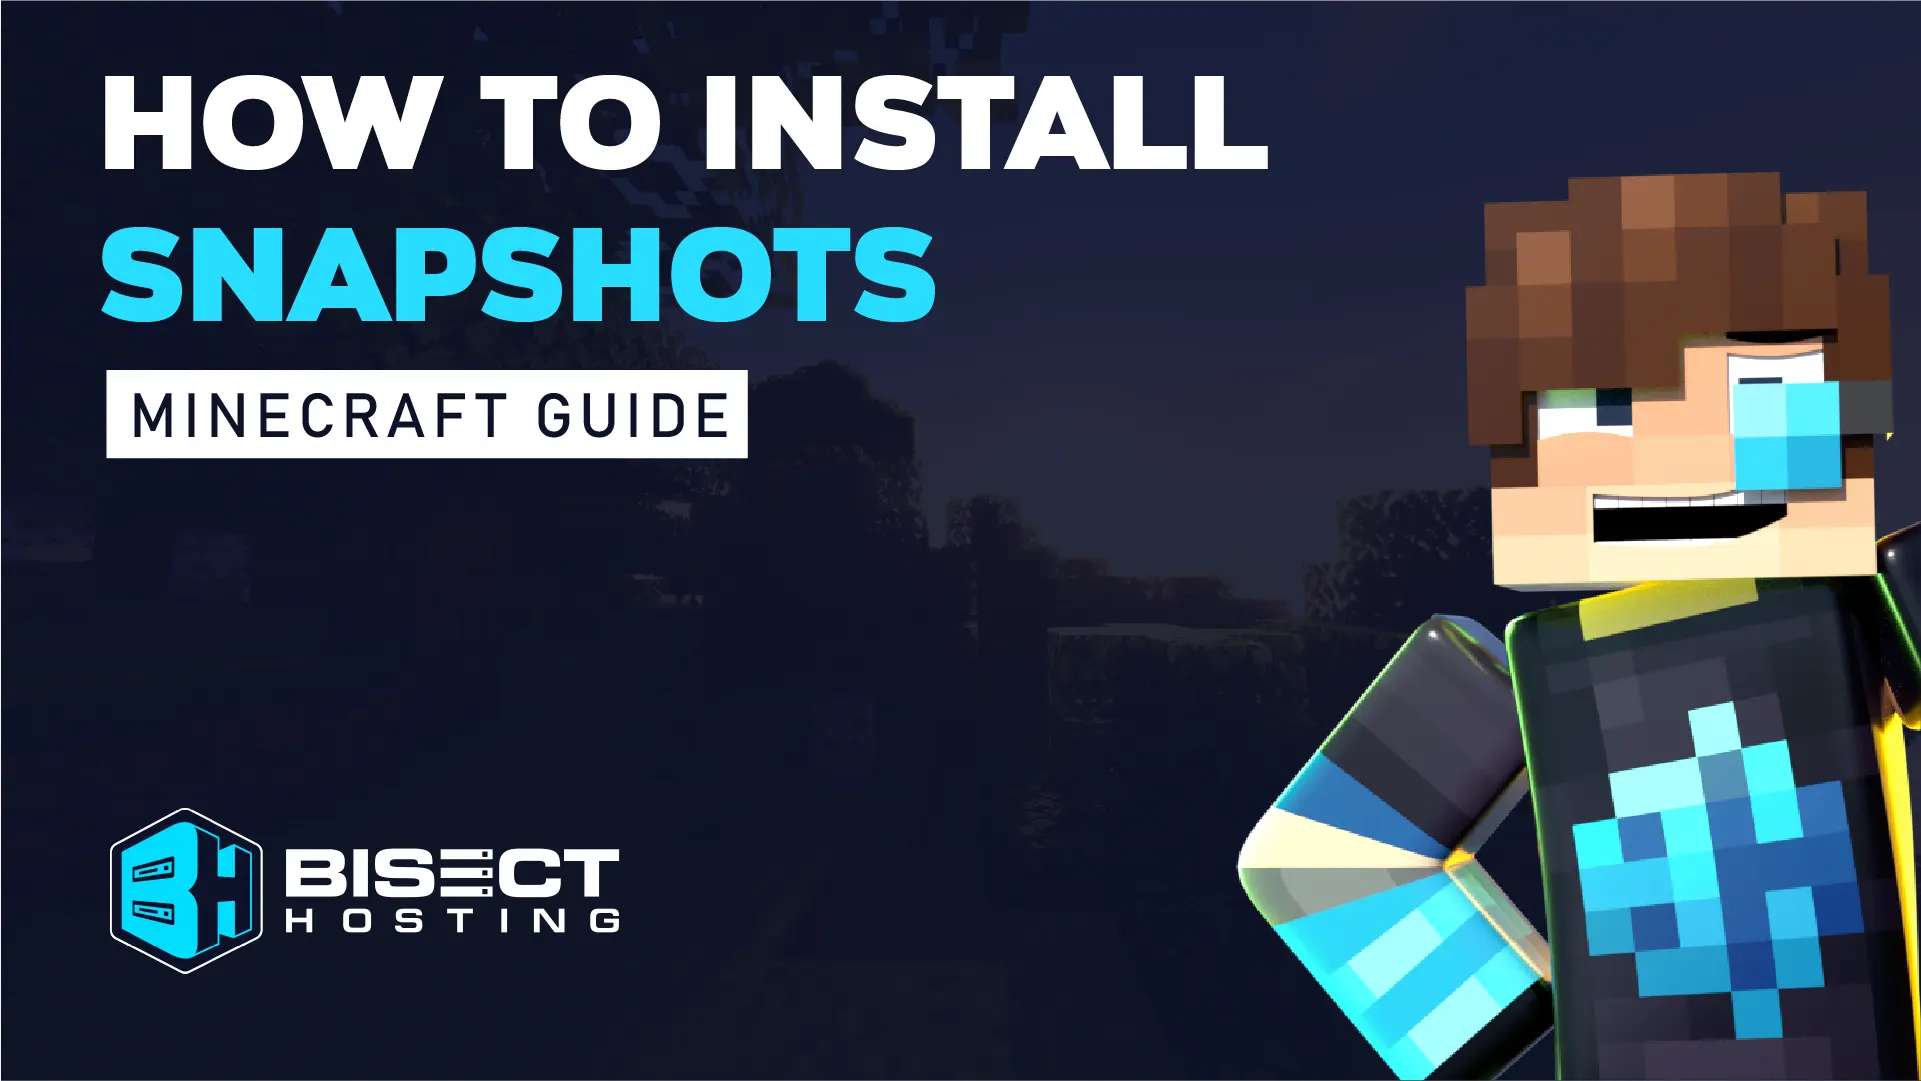 Minecraft Snapshot 23w42a Update: Patch Notes & How to Install